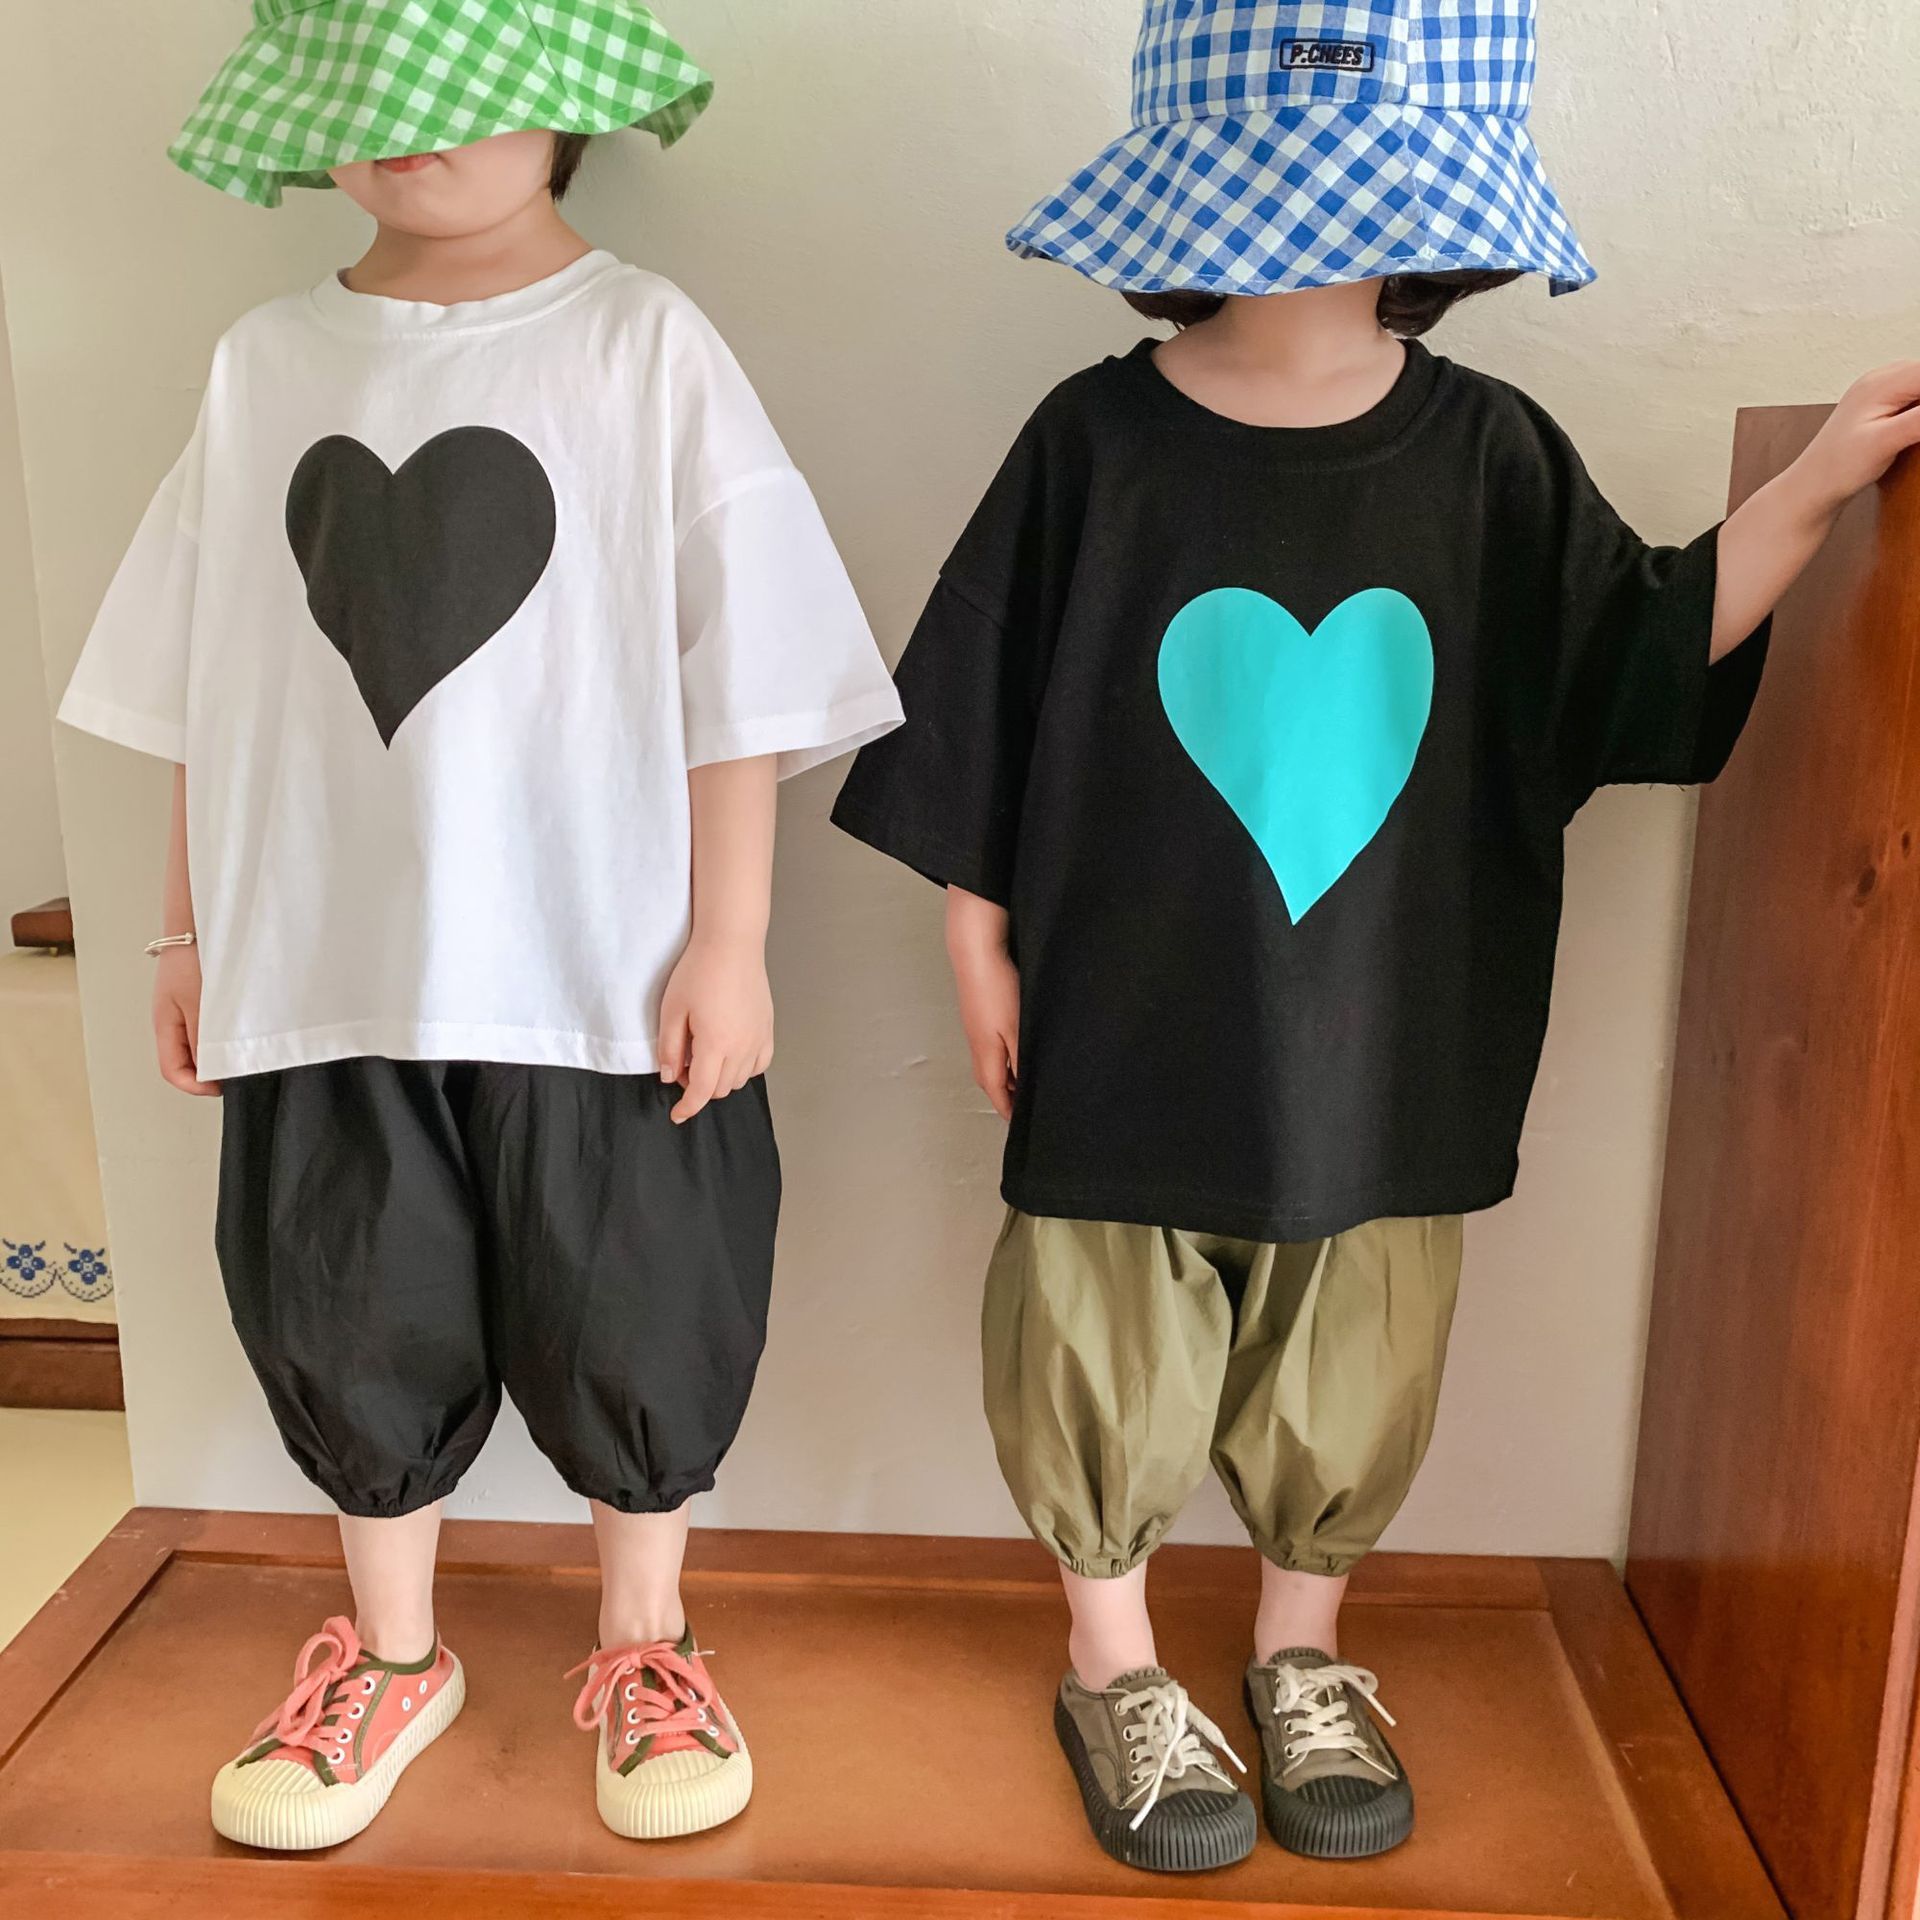 Children's short-sleeved t-shirt boys and girls  summer love print bottoming shirt baby casual top brother and sister outfit tide